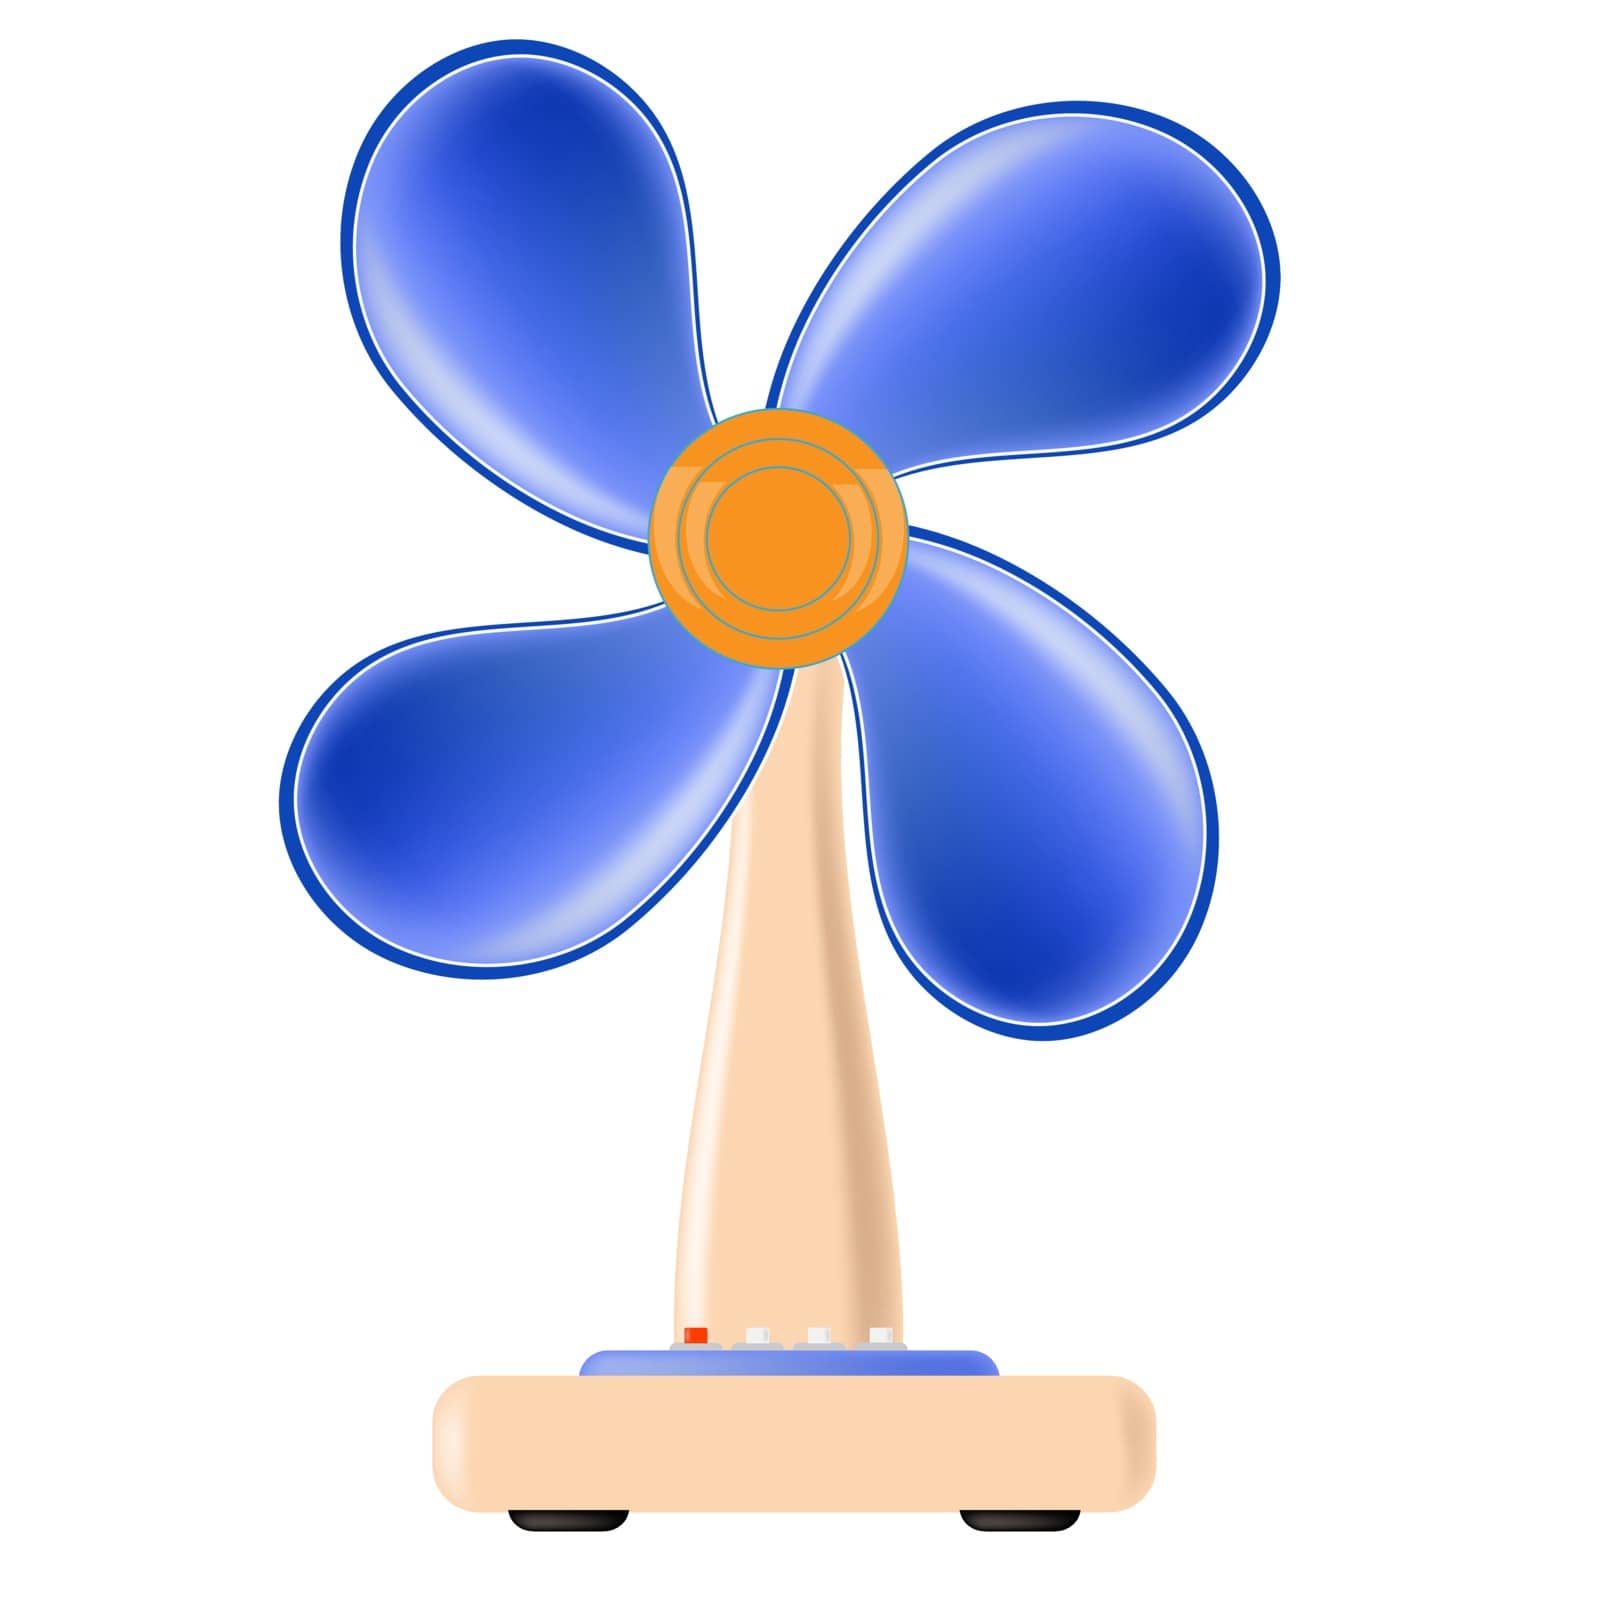 Fan Icon Isolated on White Background. Electric Fan.